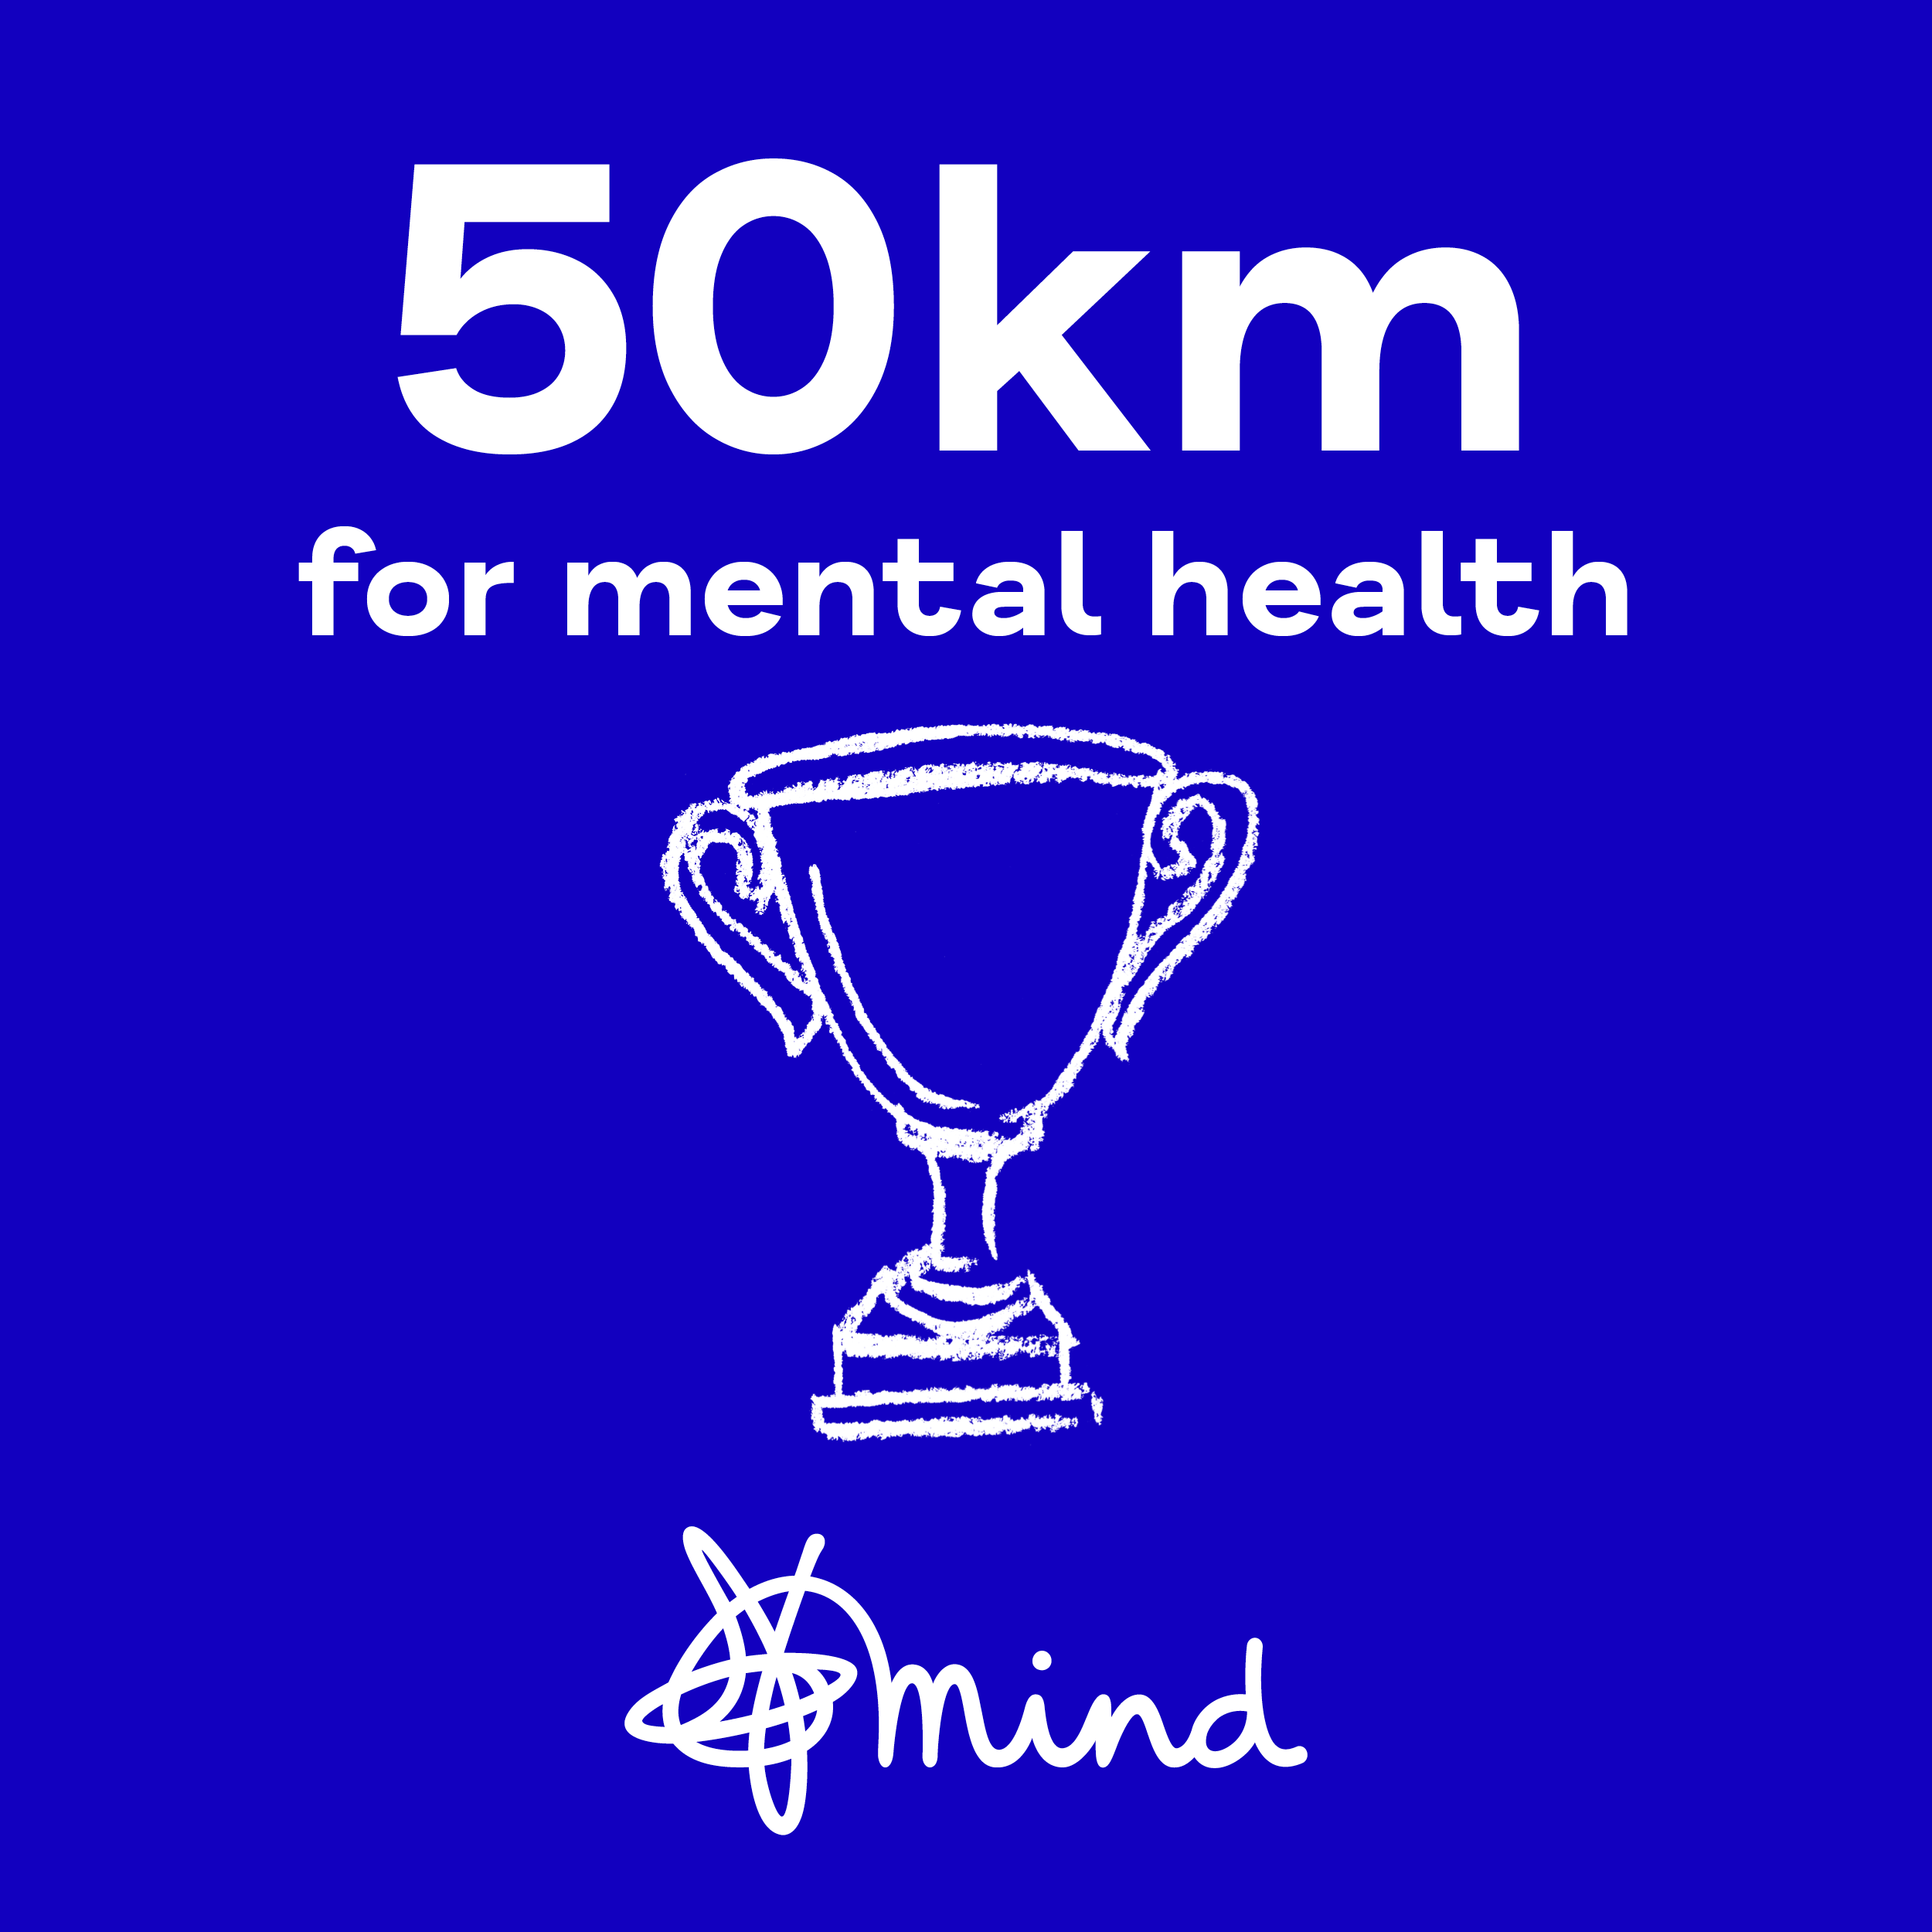 The words '50km for mental health' with an illustration of a pair of trainers and the Mind logo